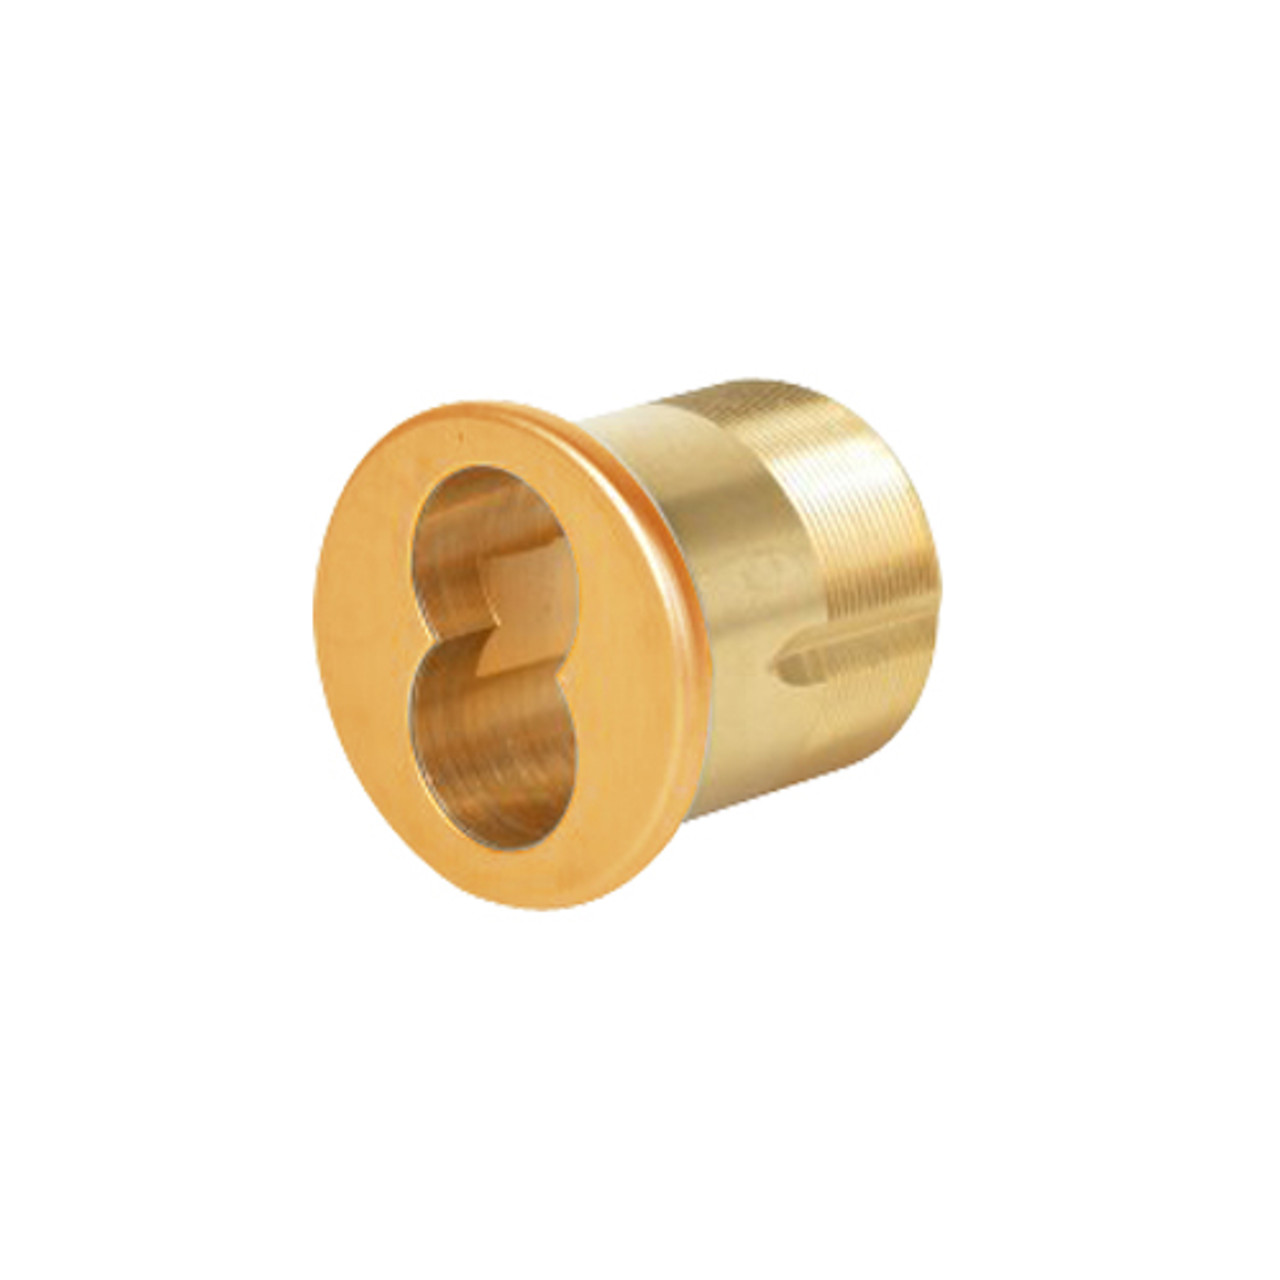 CR1070-134-A01-7-612 Corbin Mortise Interchangeable Core Housing with Cloverleaf Cam in Satin Bronze Finish